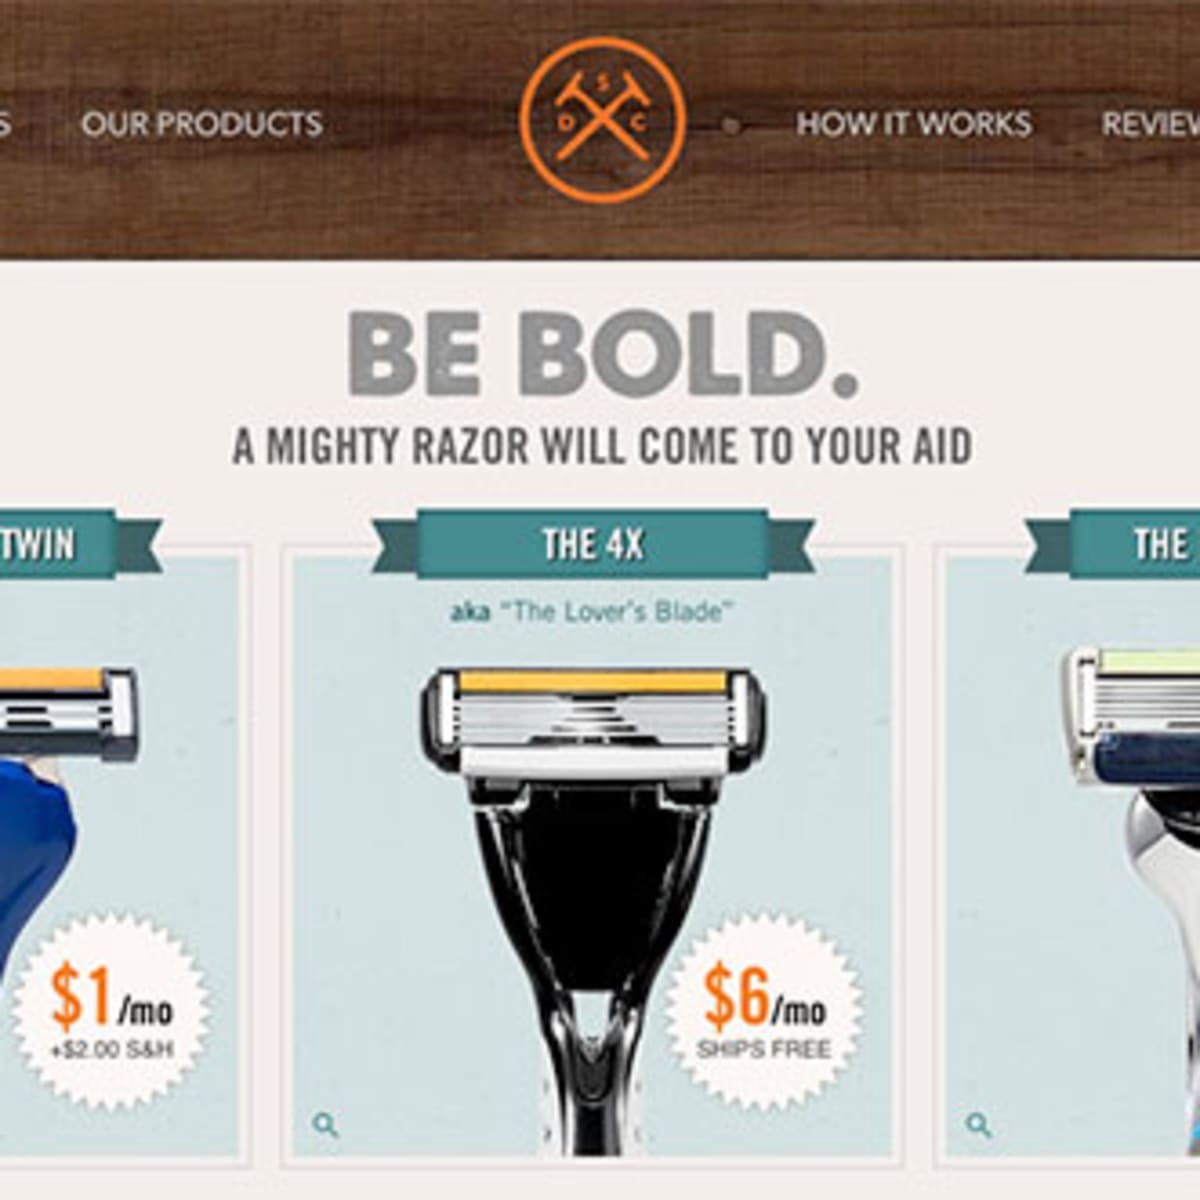 Unilever Looks to Dollar Shave Club to Gain Edge on Rivals - TheStreet